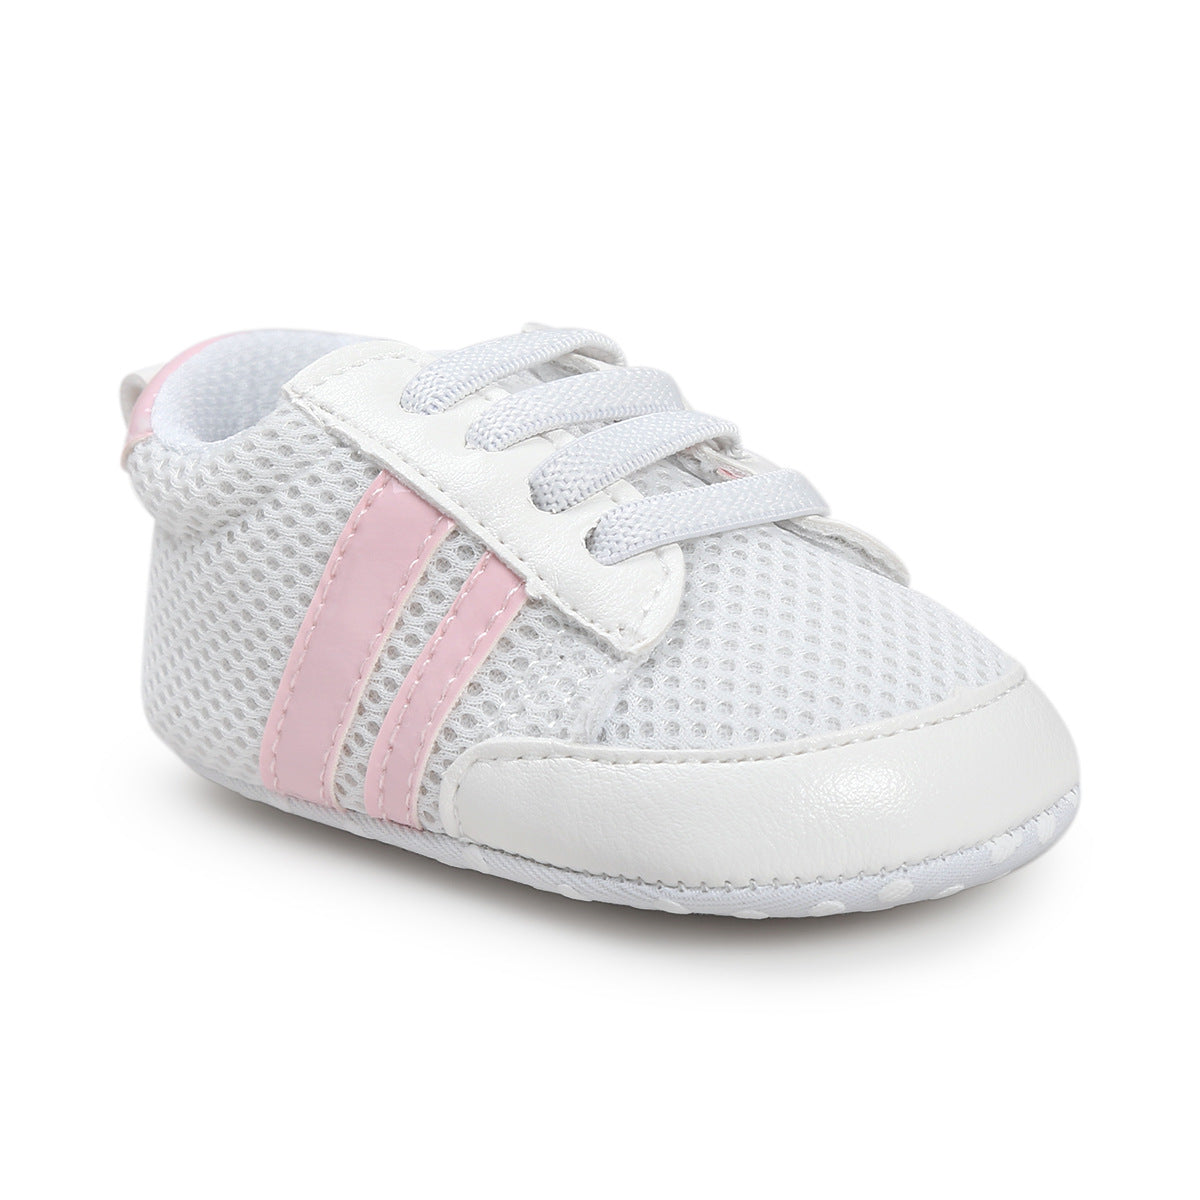 Children PU Leather Sneakers